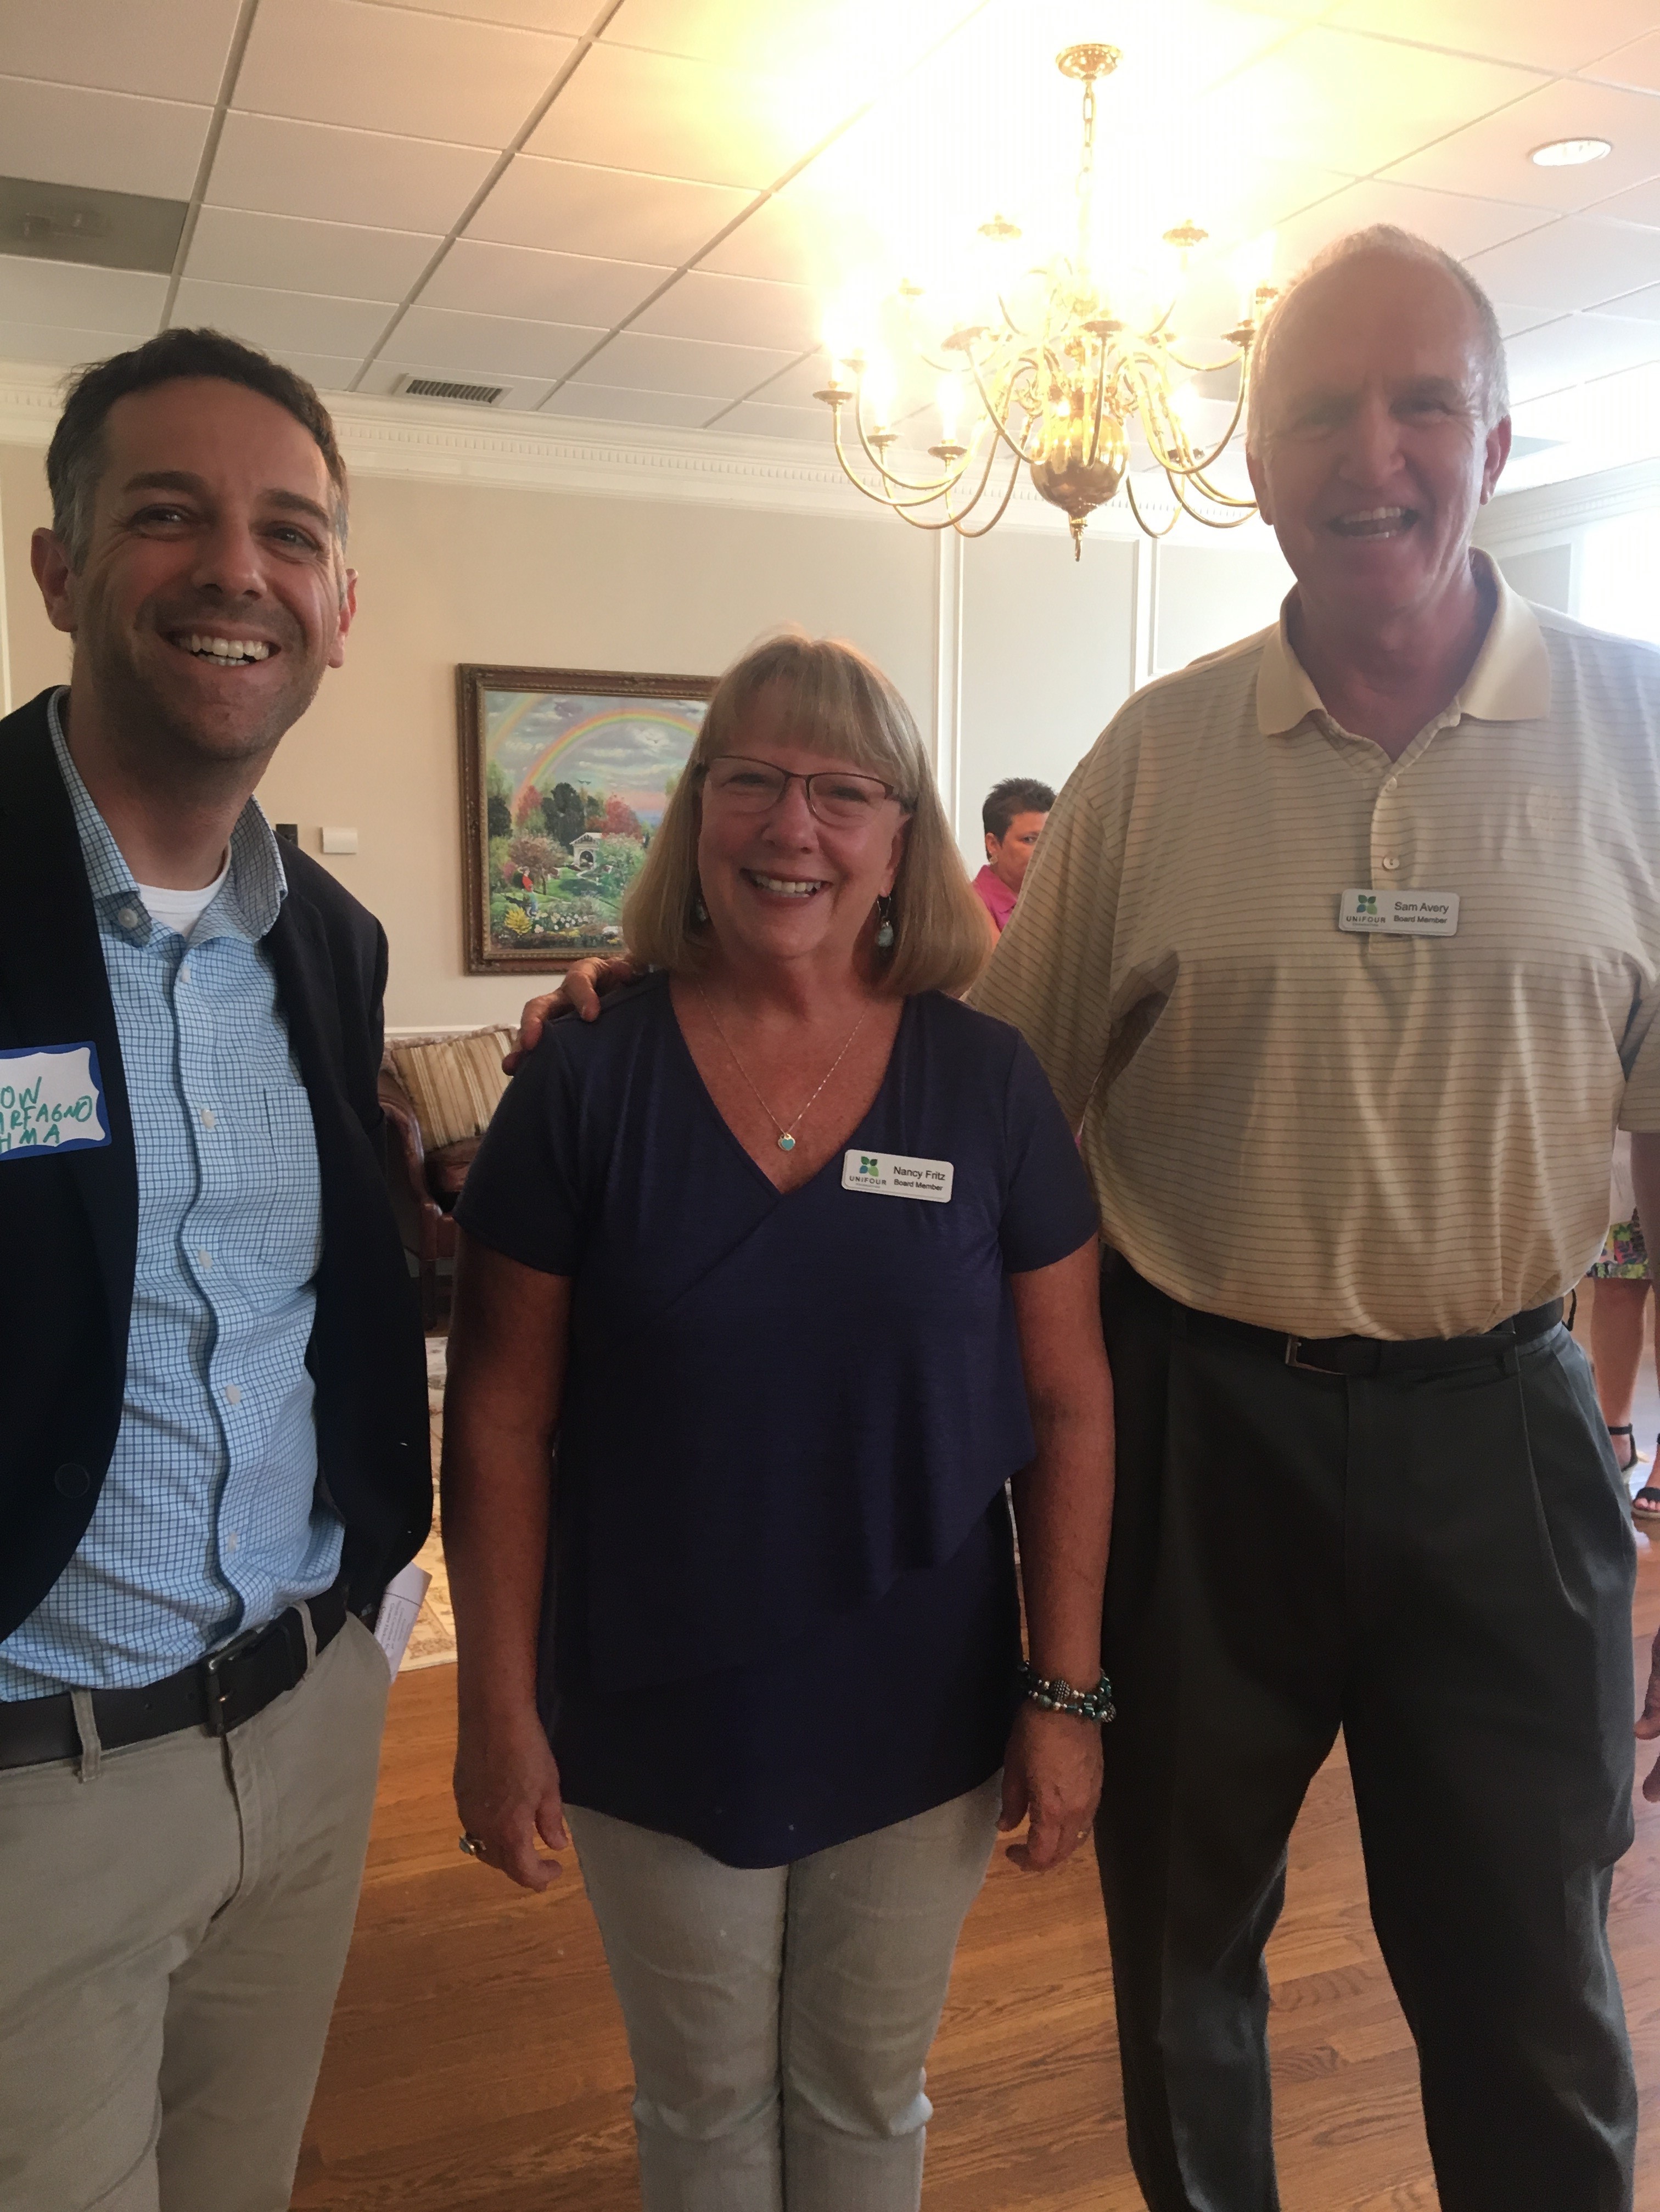 (From left to right) Jon Carfagno (Hickory Museum of Art executive director), Nancy Fritz (Unifour board president) and Sam Avery (Unifour board member)